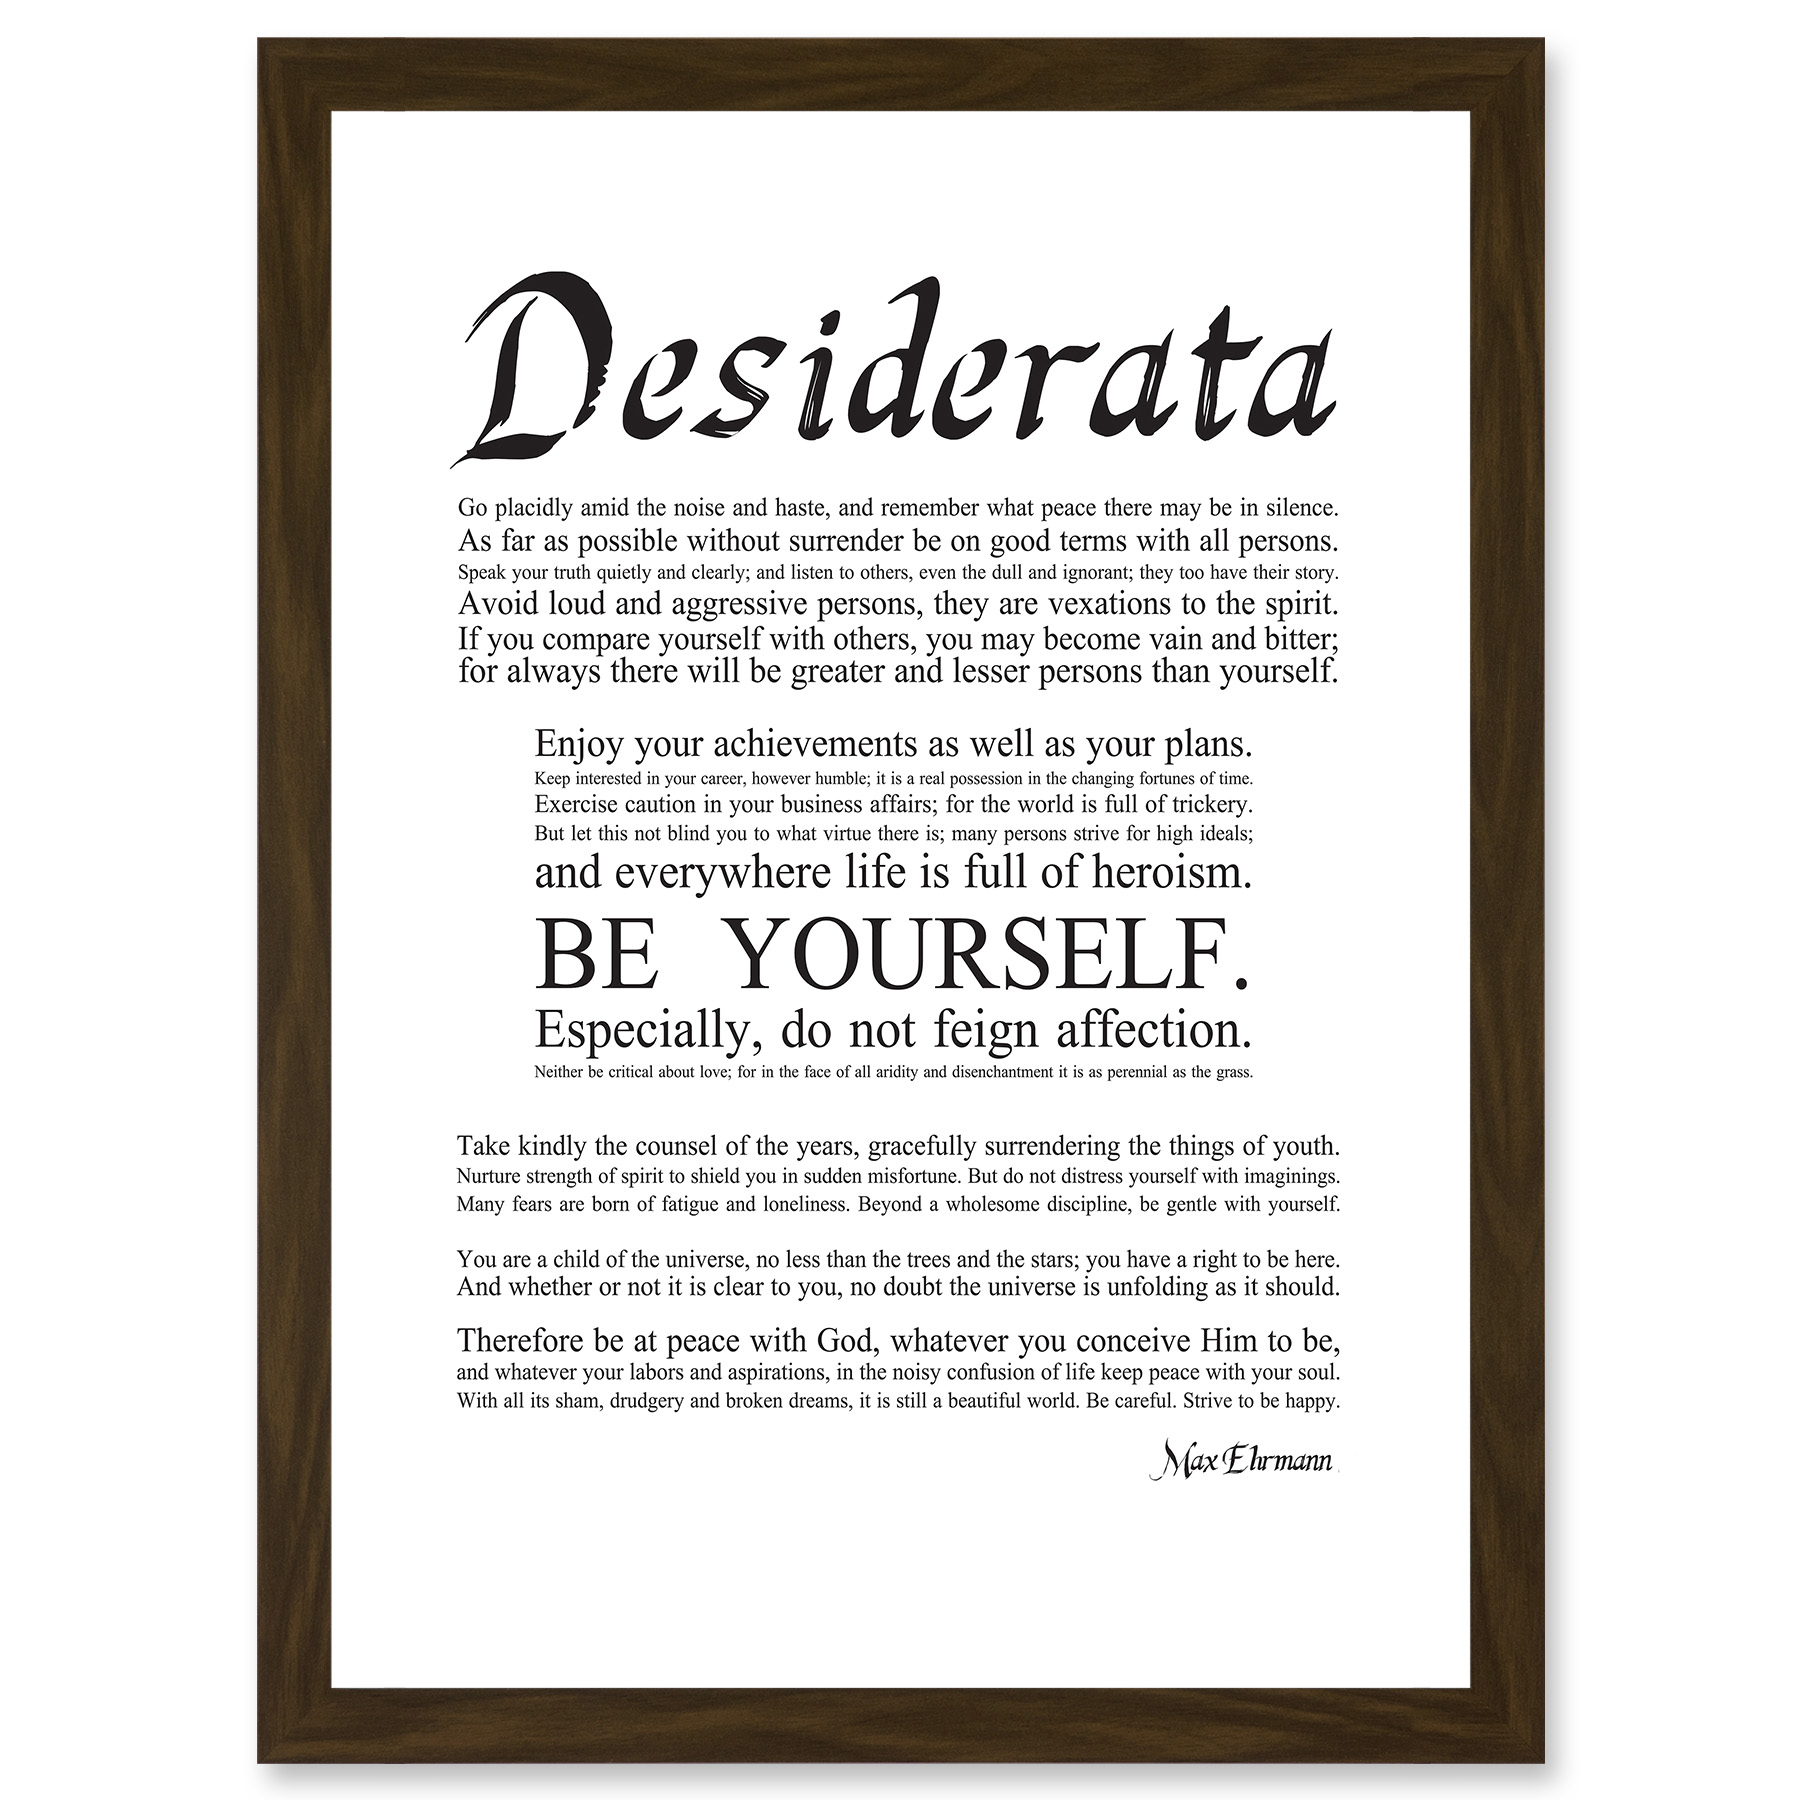 Desiderata Ehrmann Go Placidly Amid Yourself Quote A4 Artwork Framed Wall Art Print - image 1 of 4